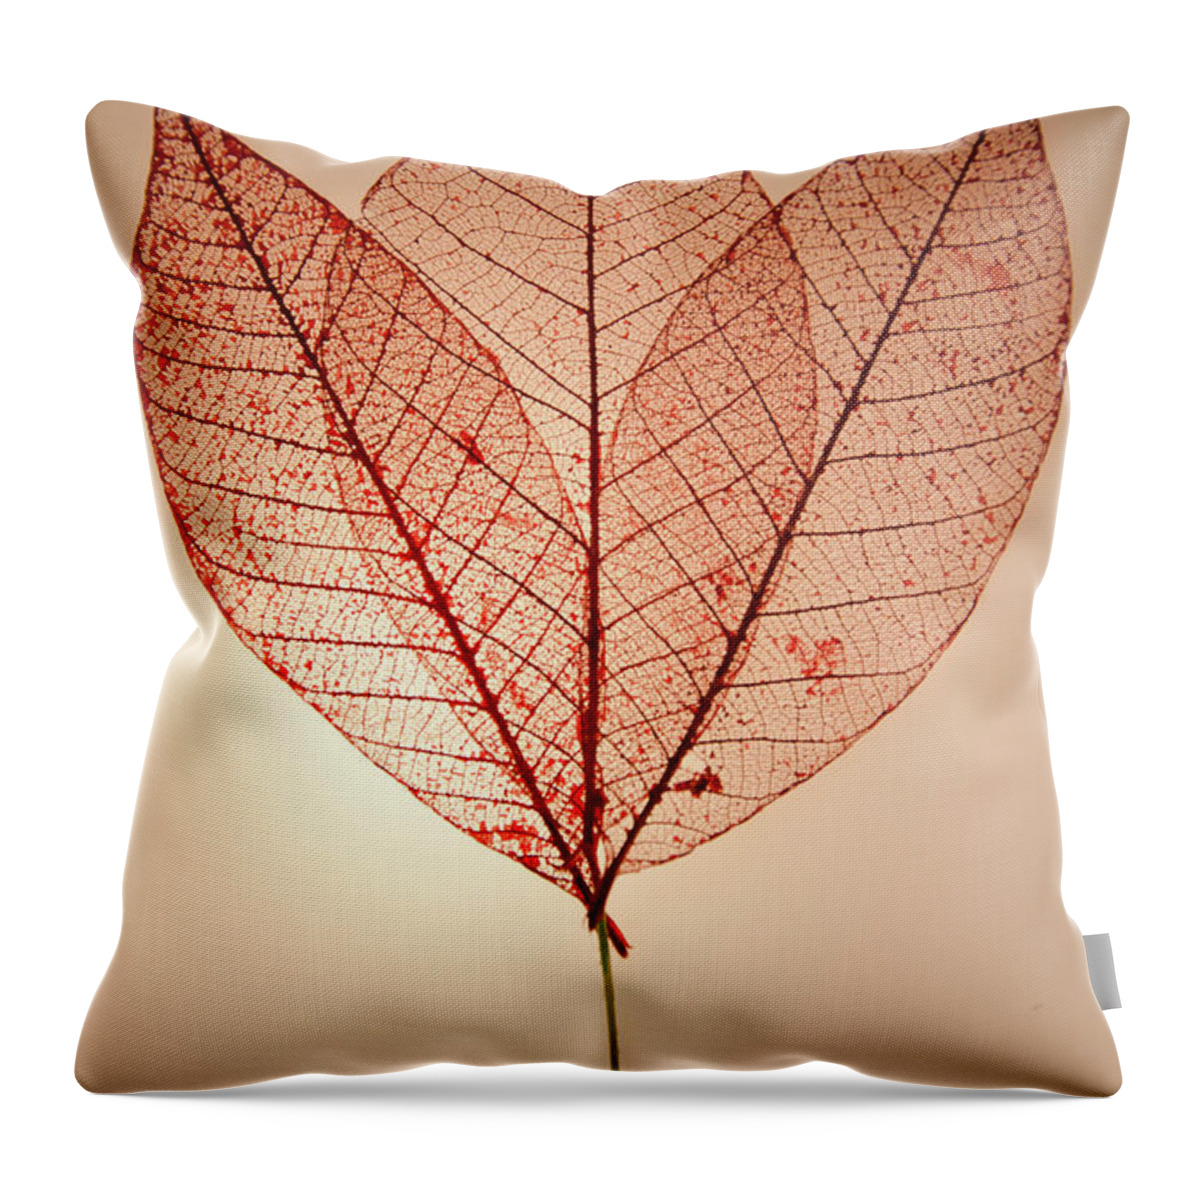 Leaves Throw Pillow featuring the photograph Skeleton Leaves by Susan Cliett